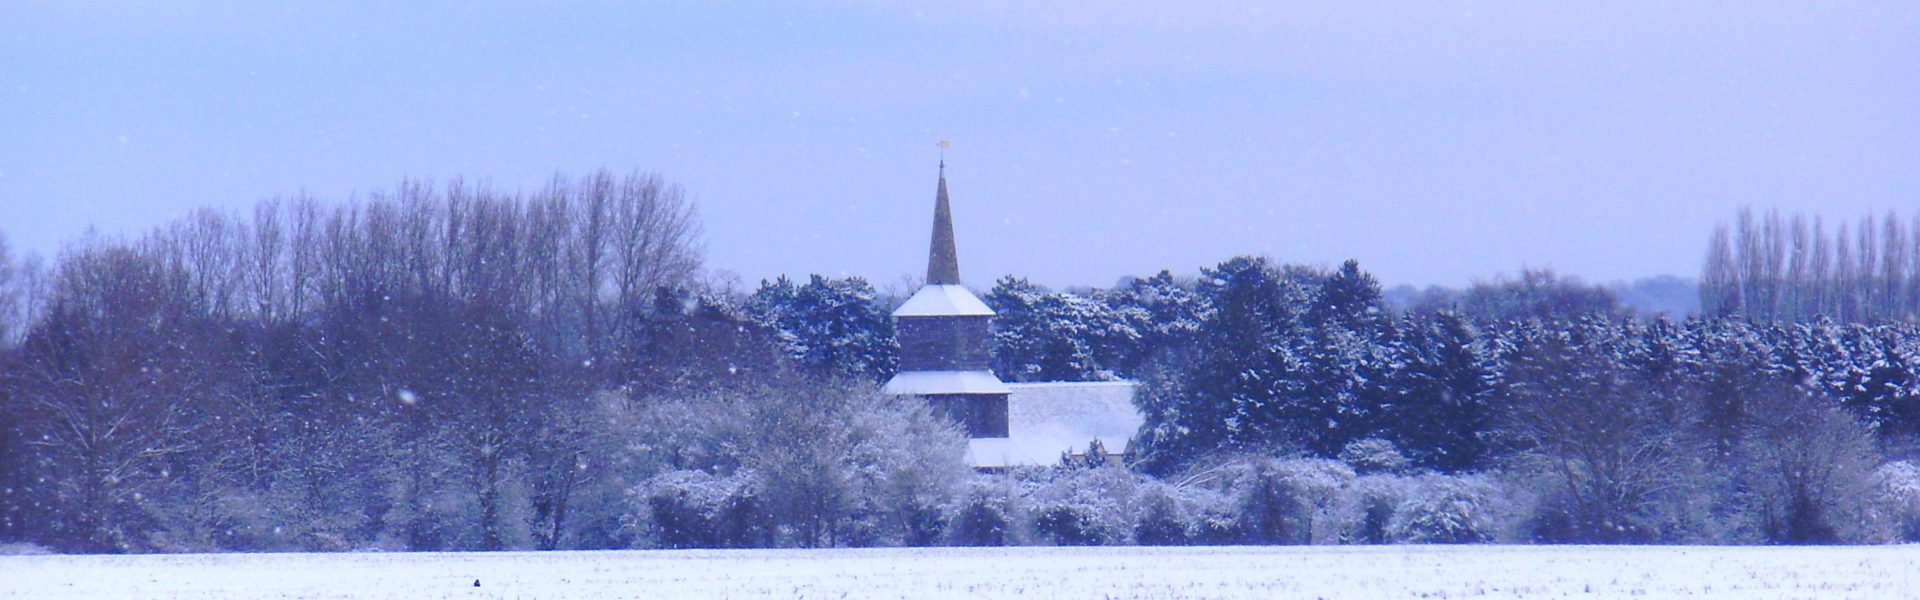 A snowy view across open farm land towards the bell tower of St Laurence church.